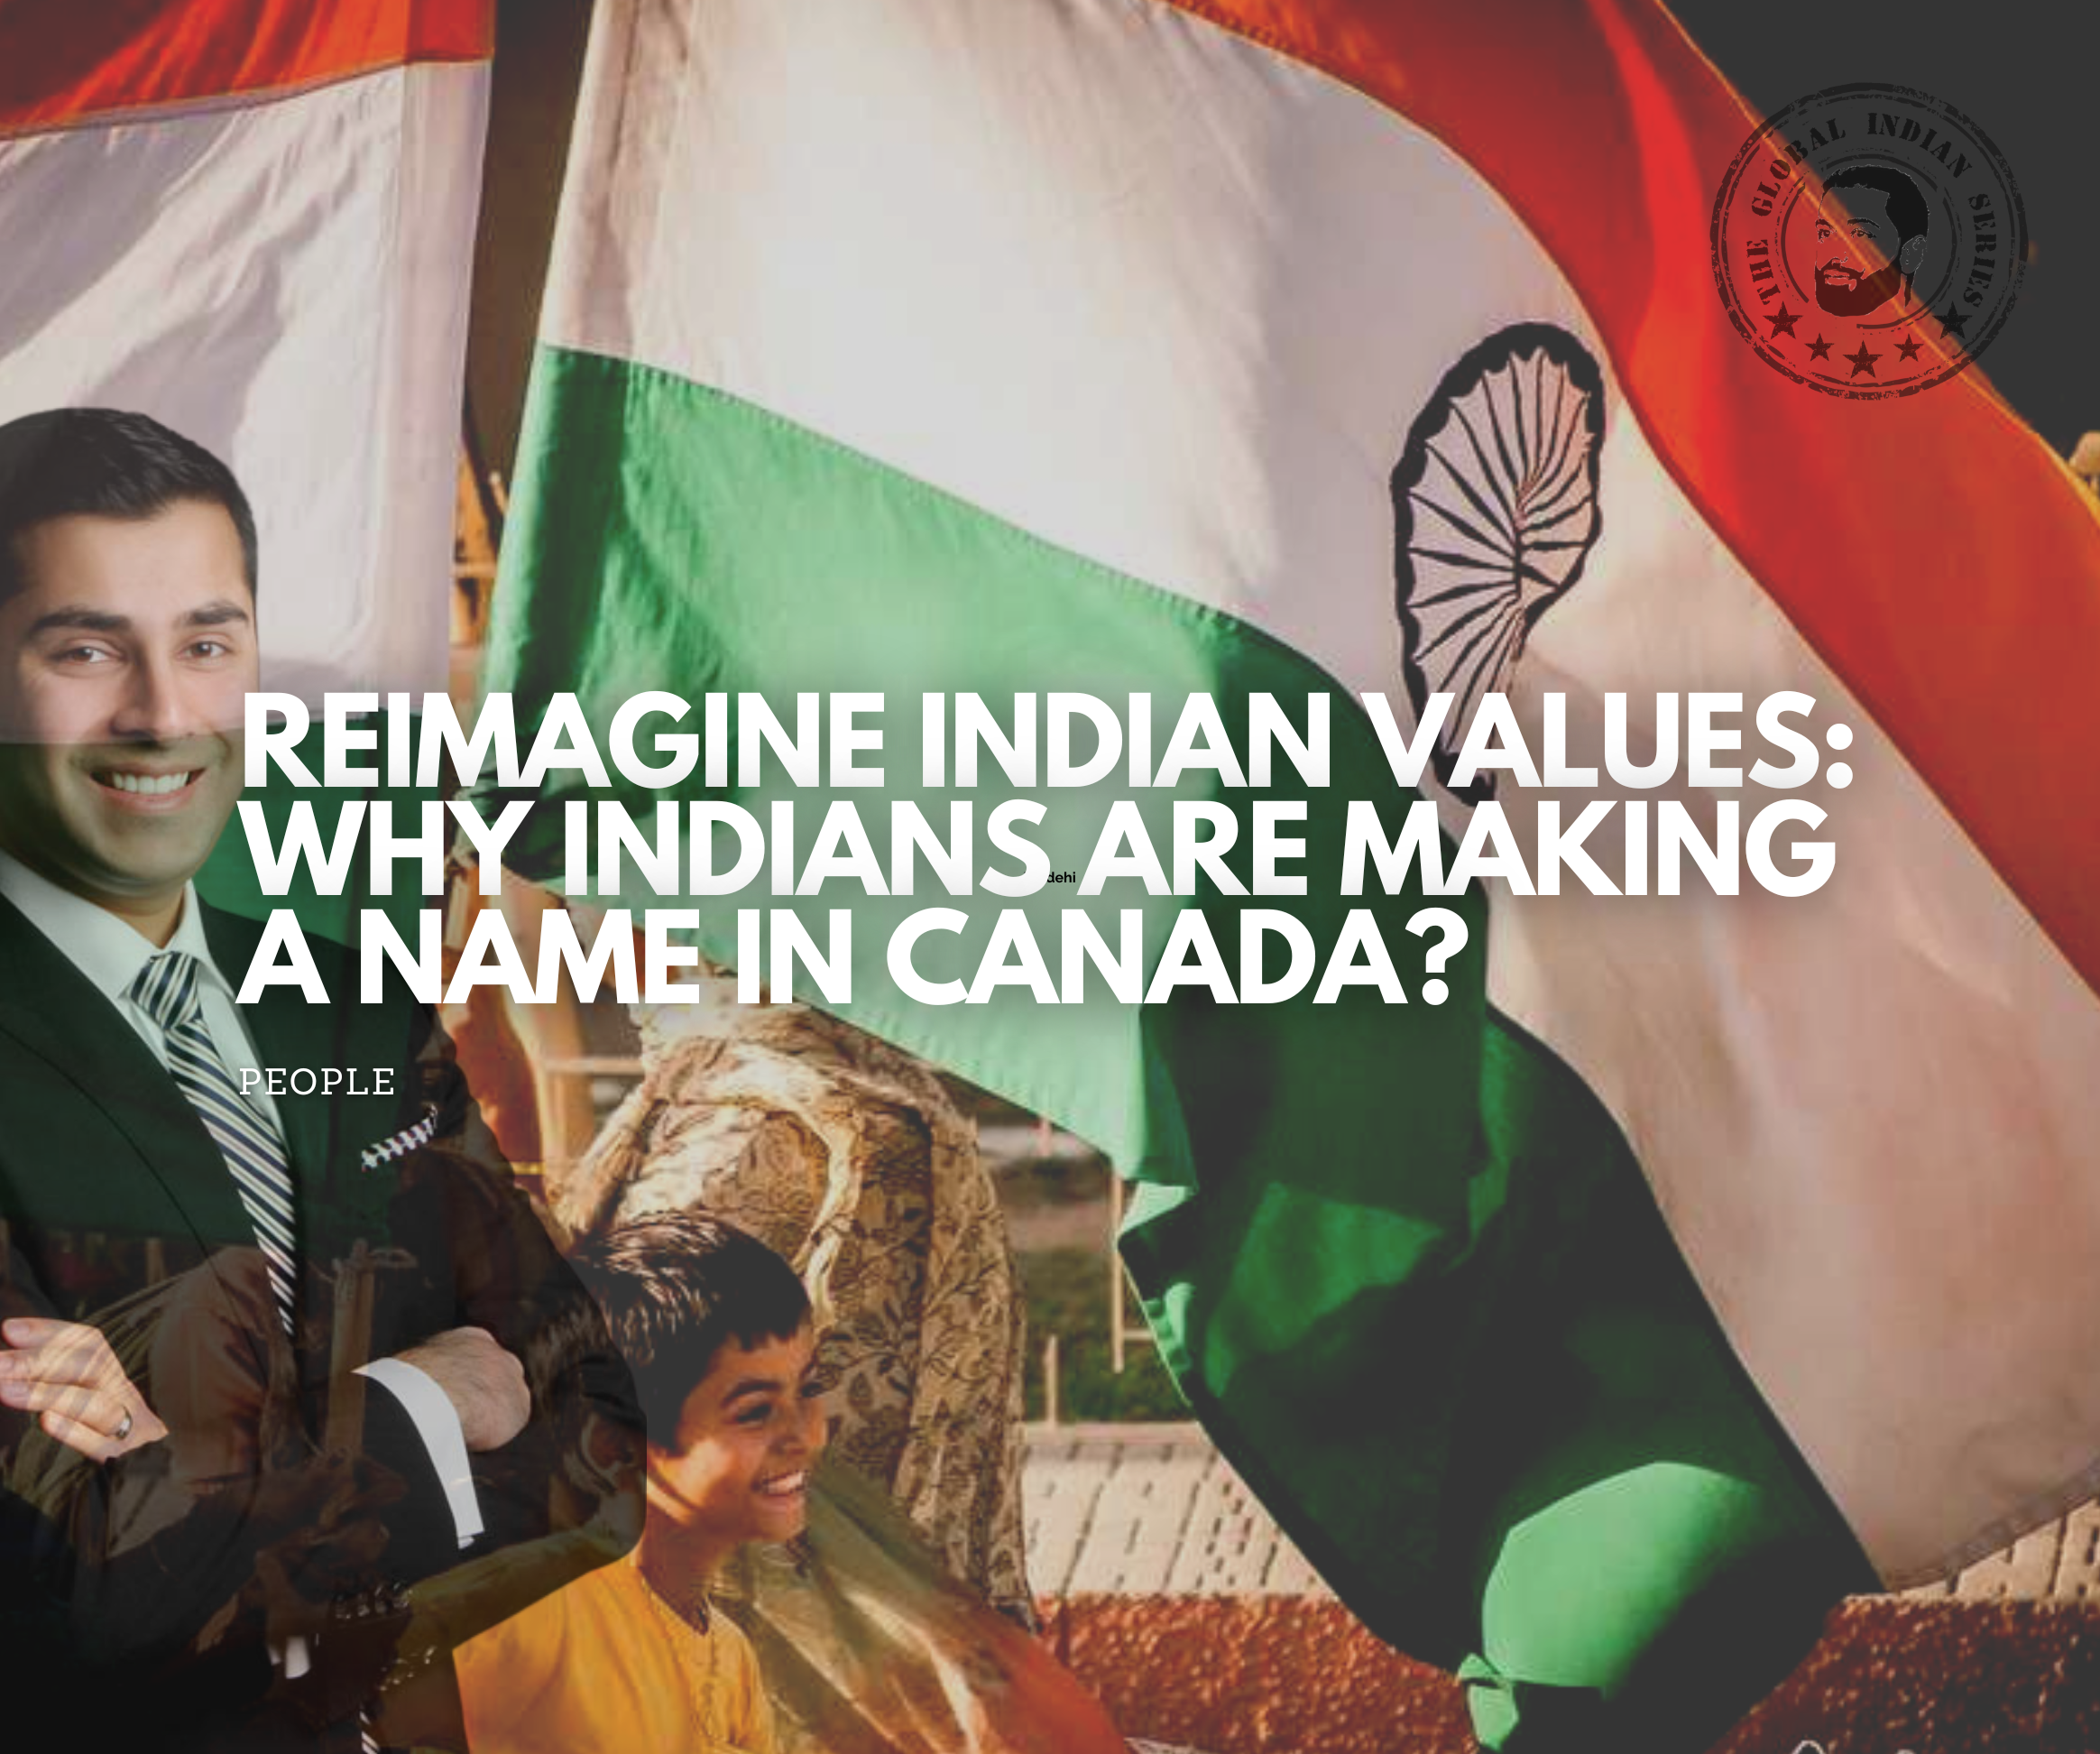 Reimagining Indian Values: Why Indians are Making a name in Canada? a narrative of Devesh Guptan, making his name big living by Indian values.